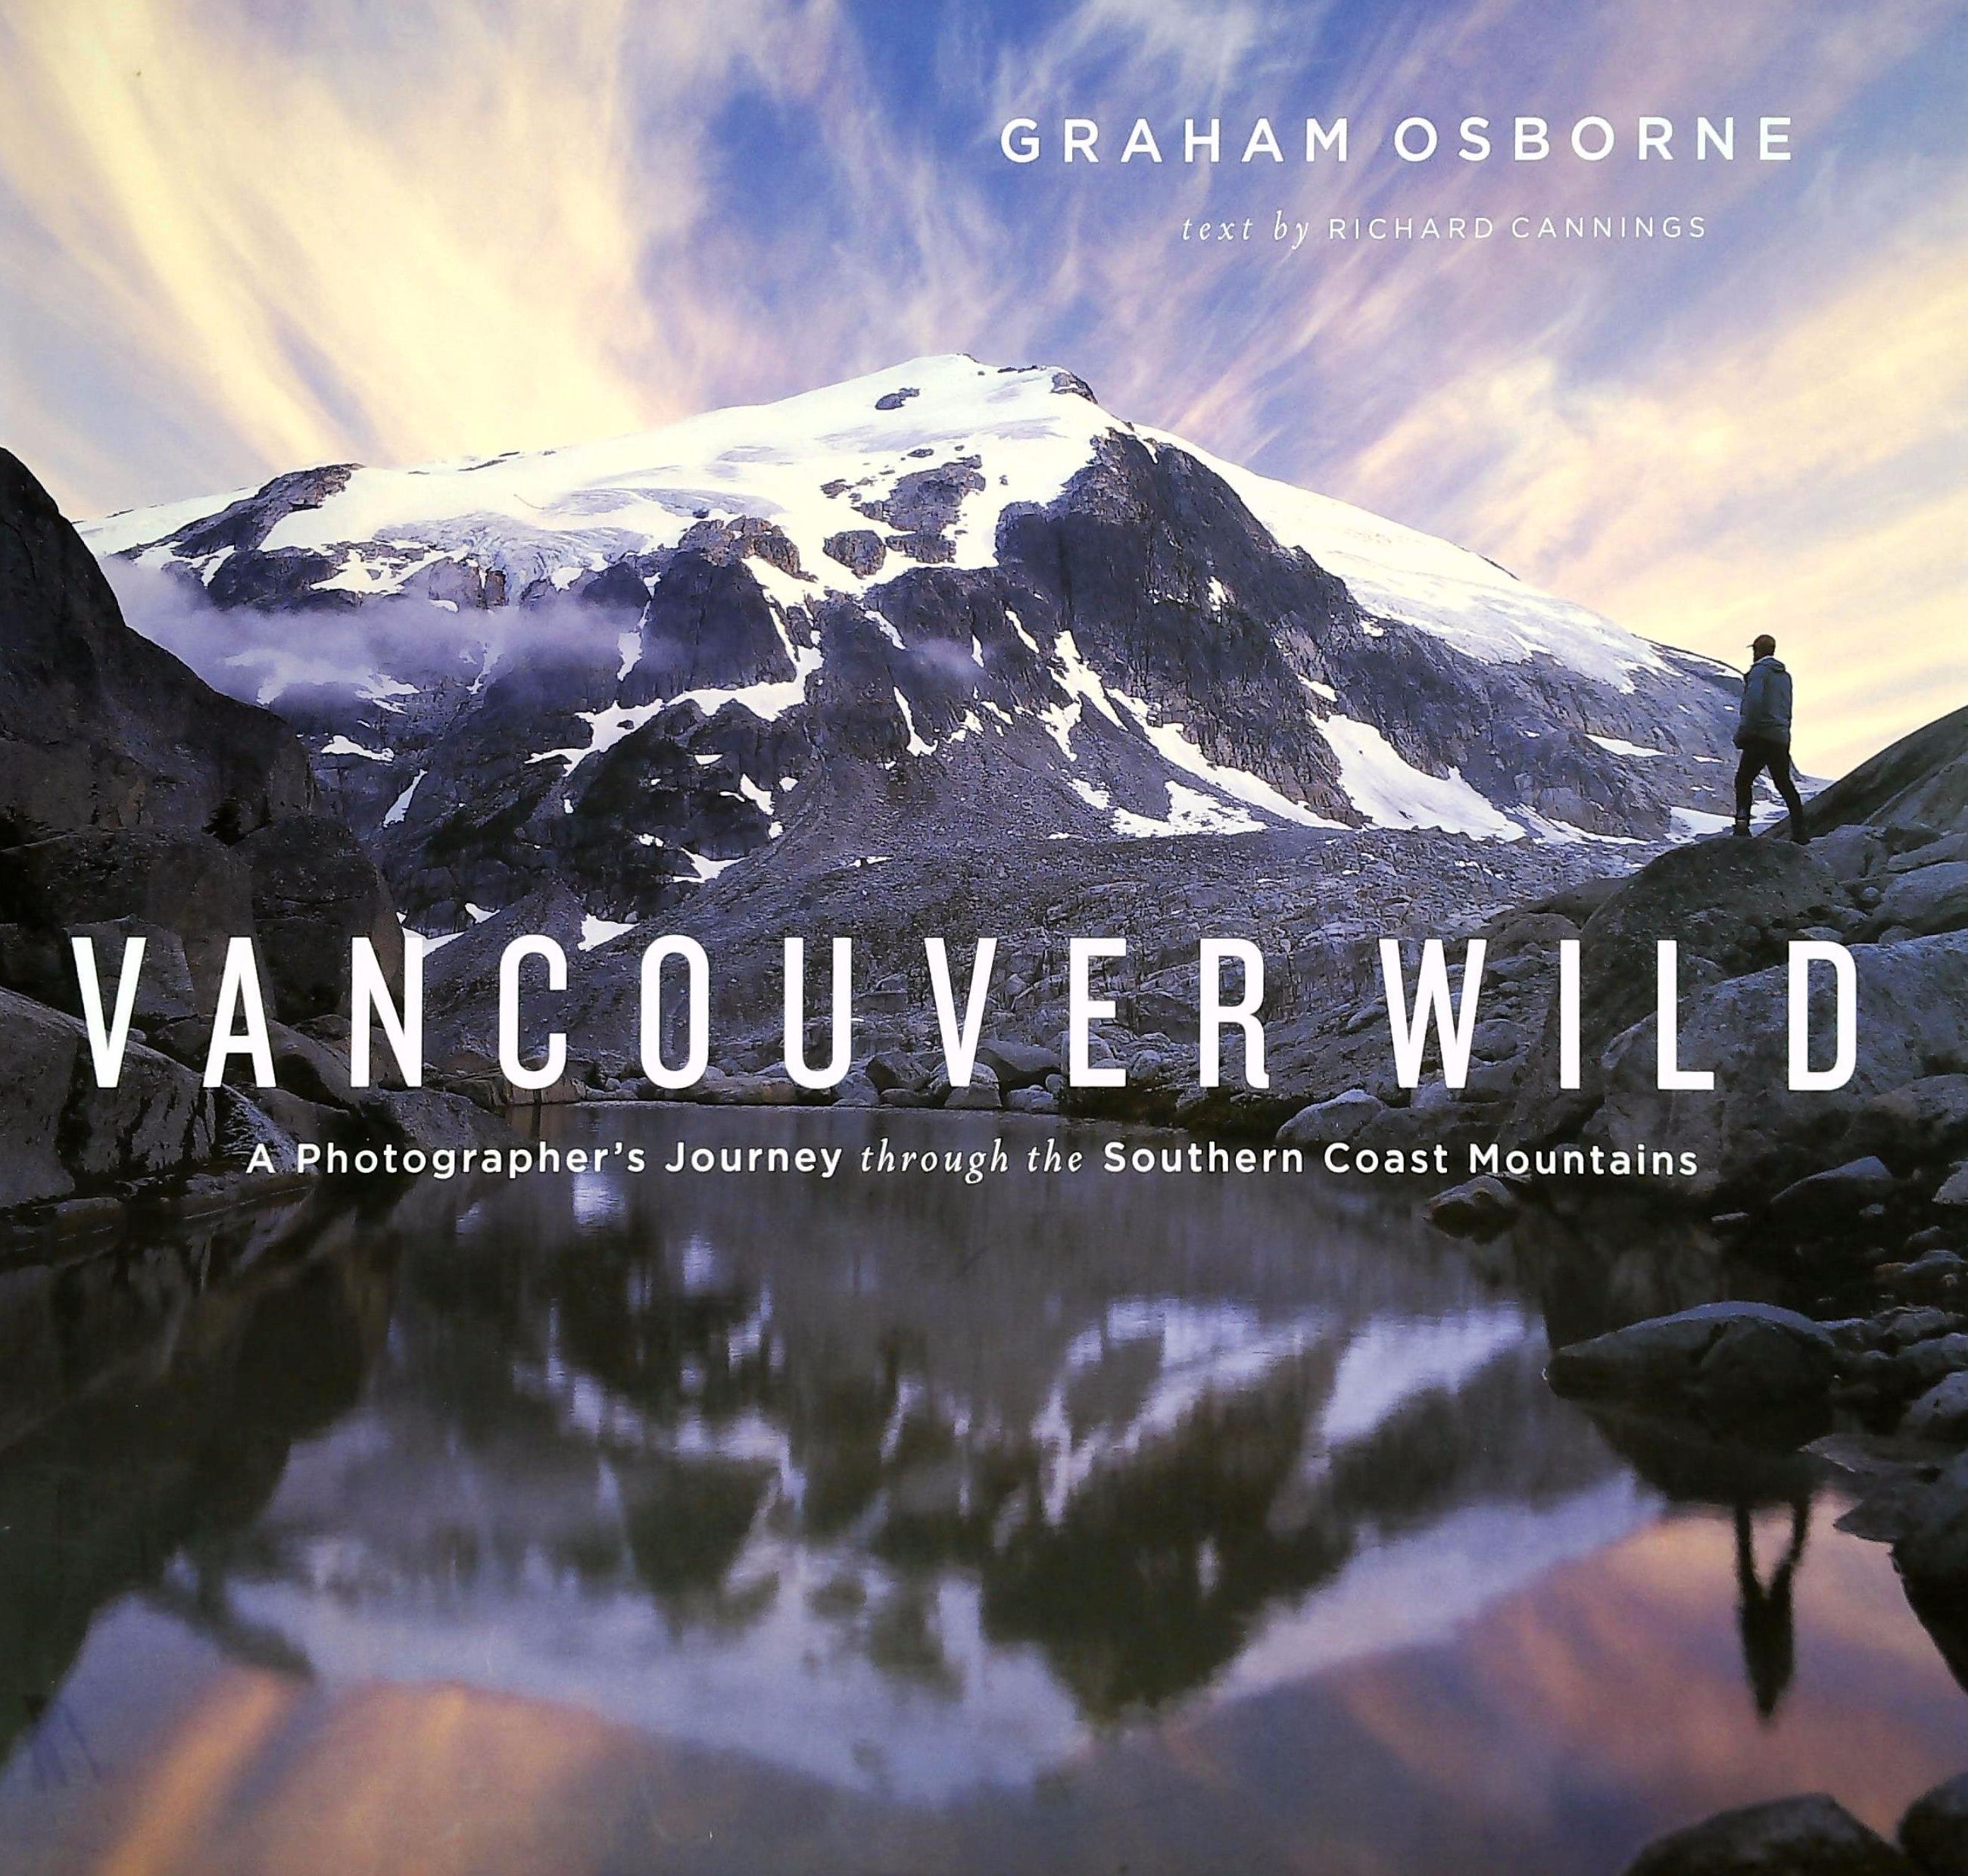 Livre ISBN 1553650026 Vancouver Wild : A Photographer's Journey Through the Southern Coast Mountains (Richard Canning)